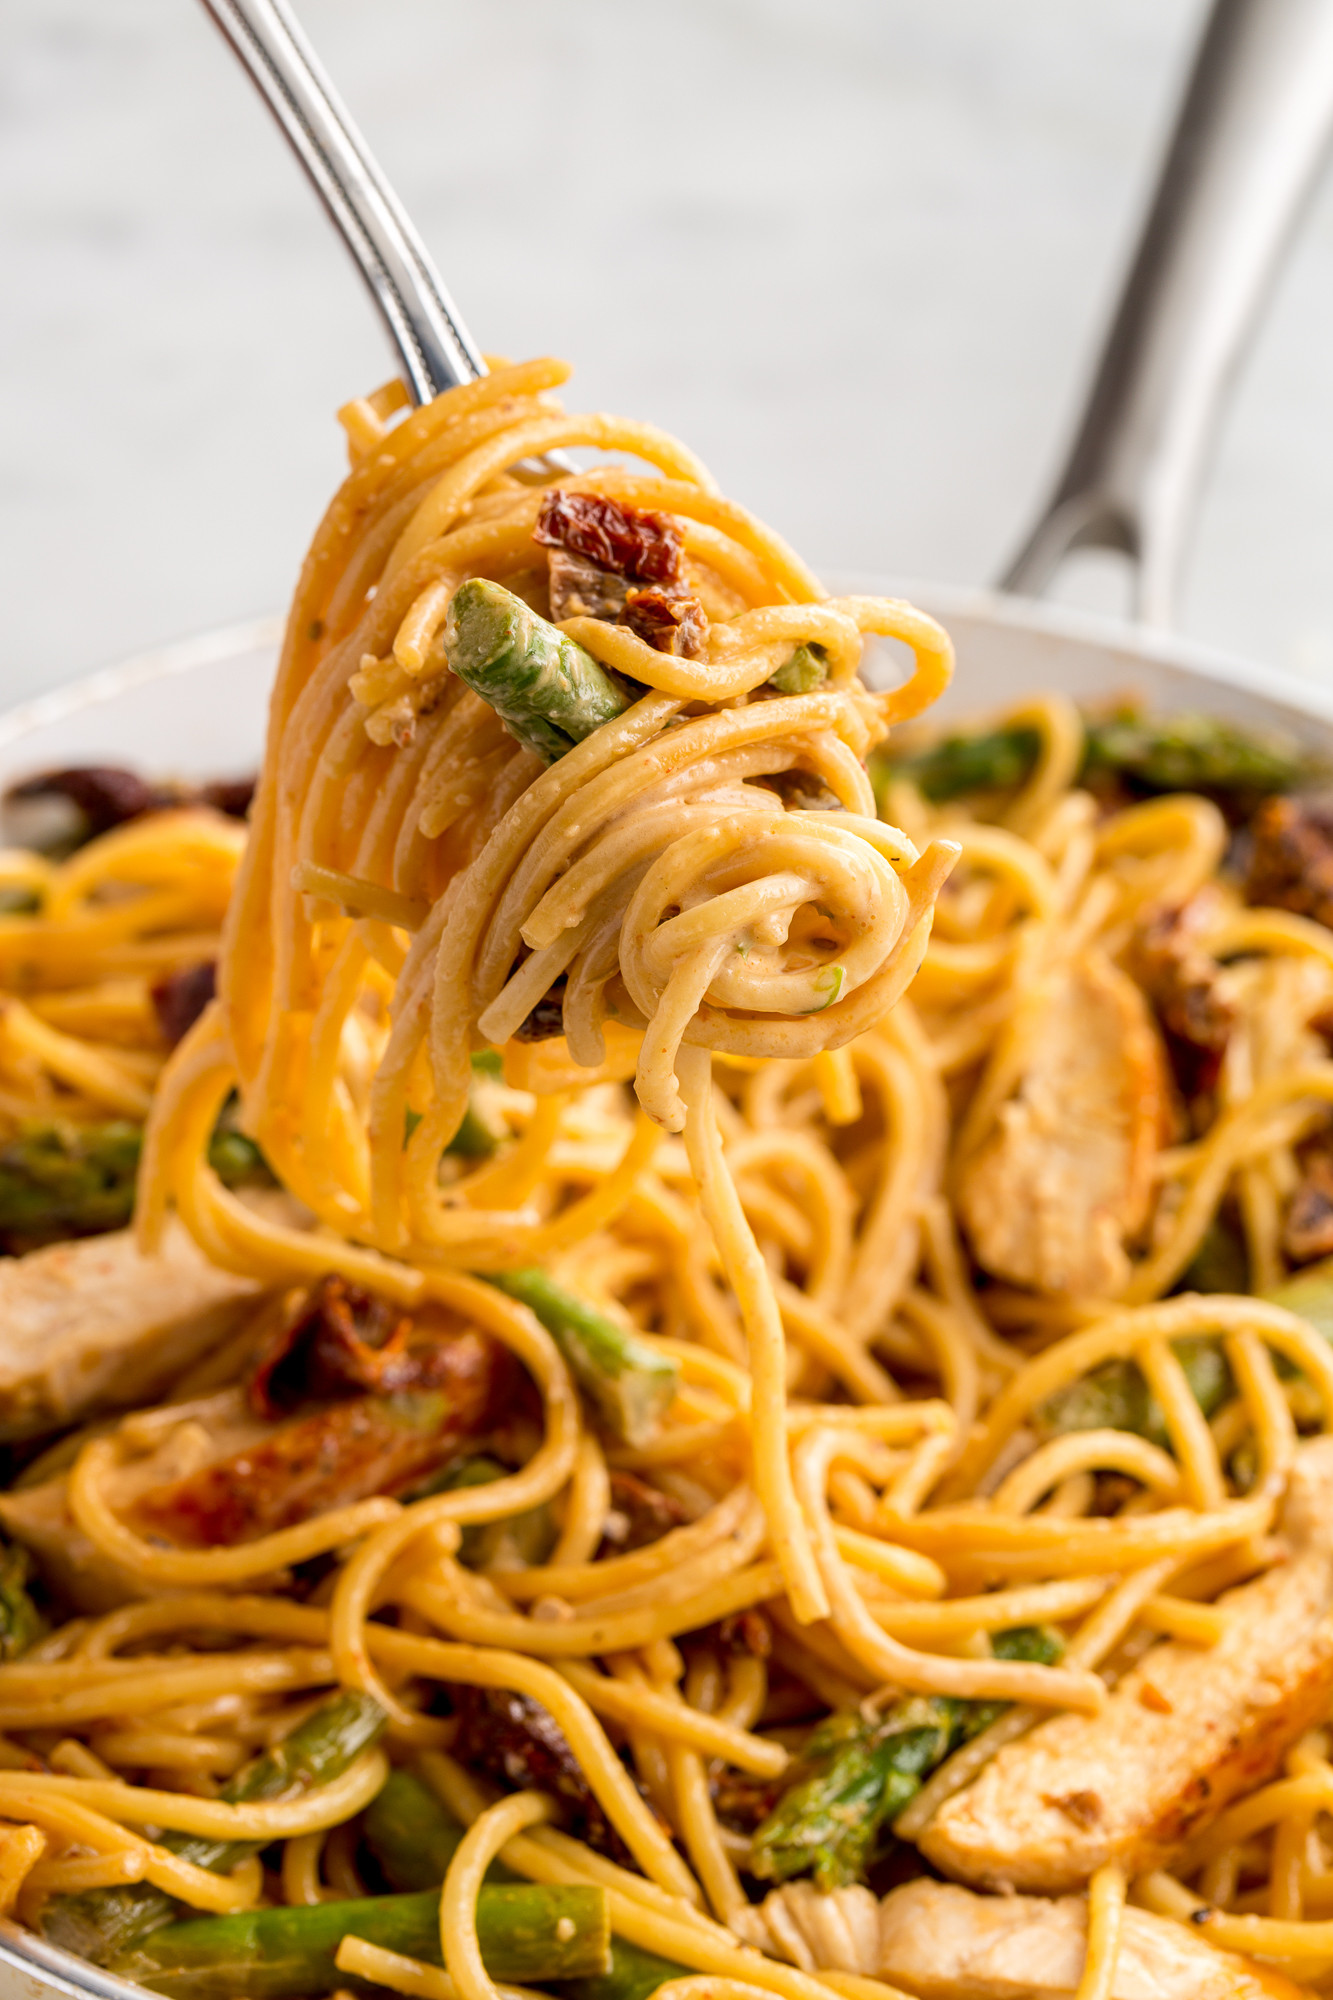 Recipe With Spaghetti Noodles
 Best Asparagus Sundried Tomato and Chicken Spaghetti